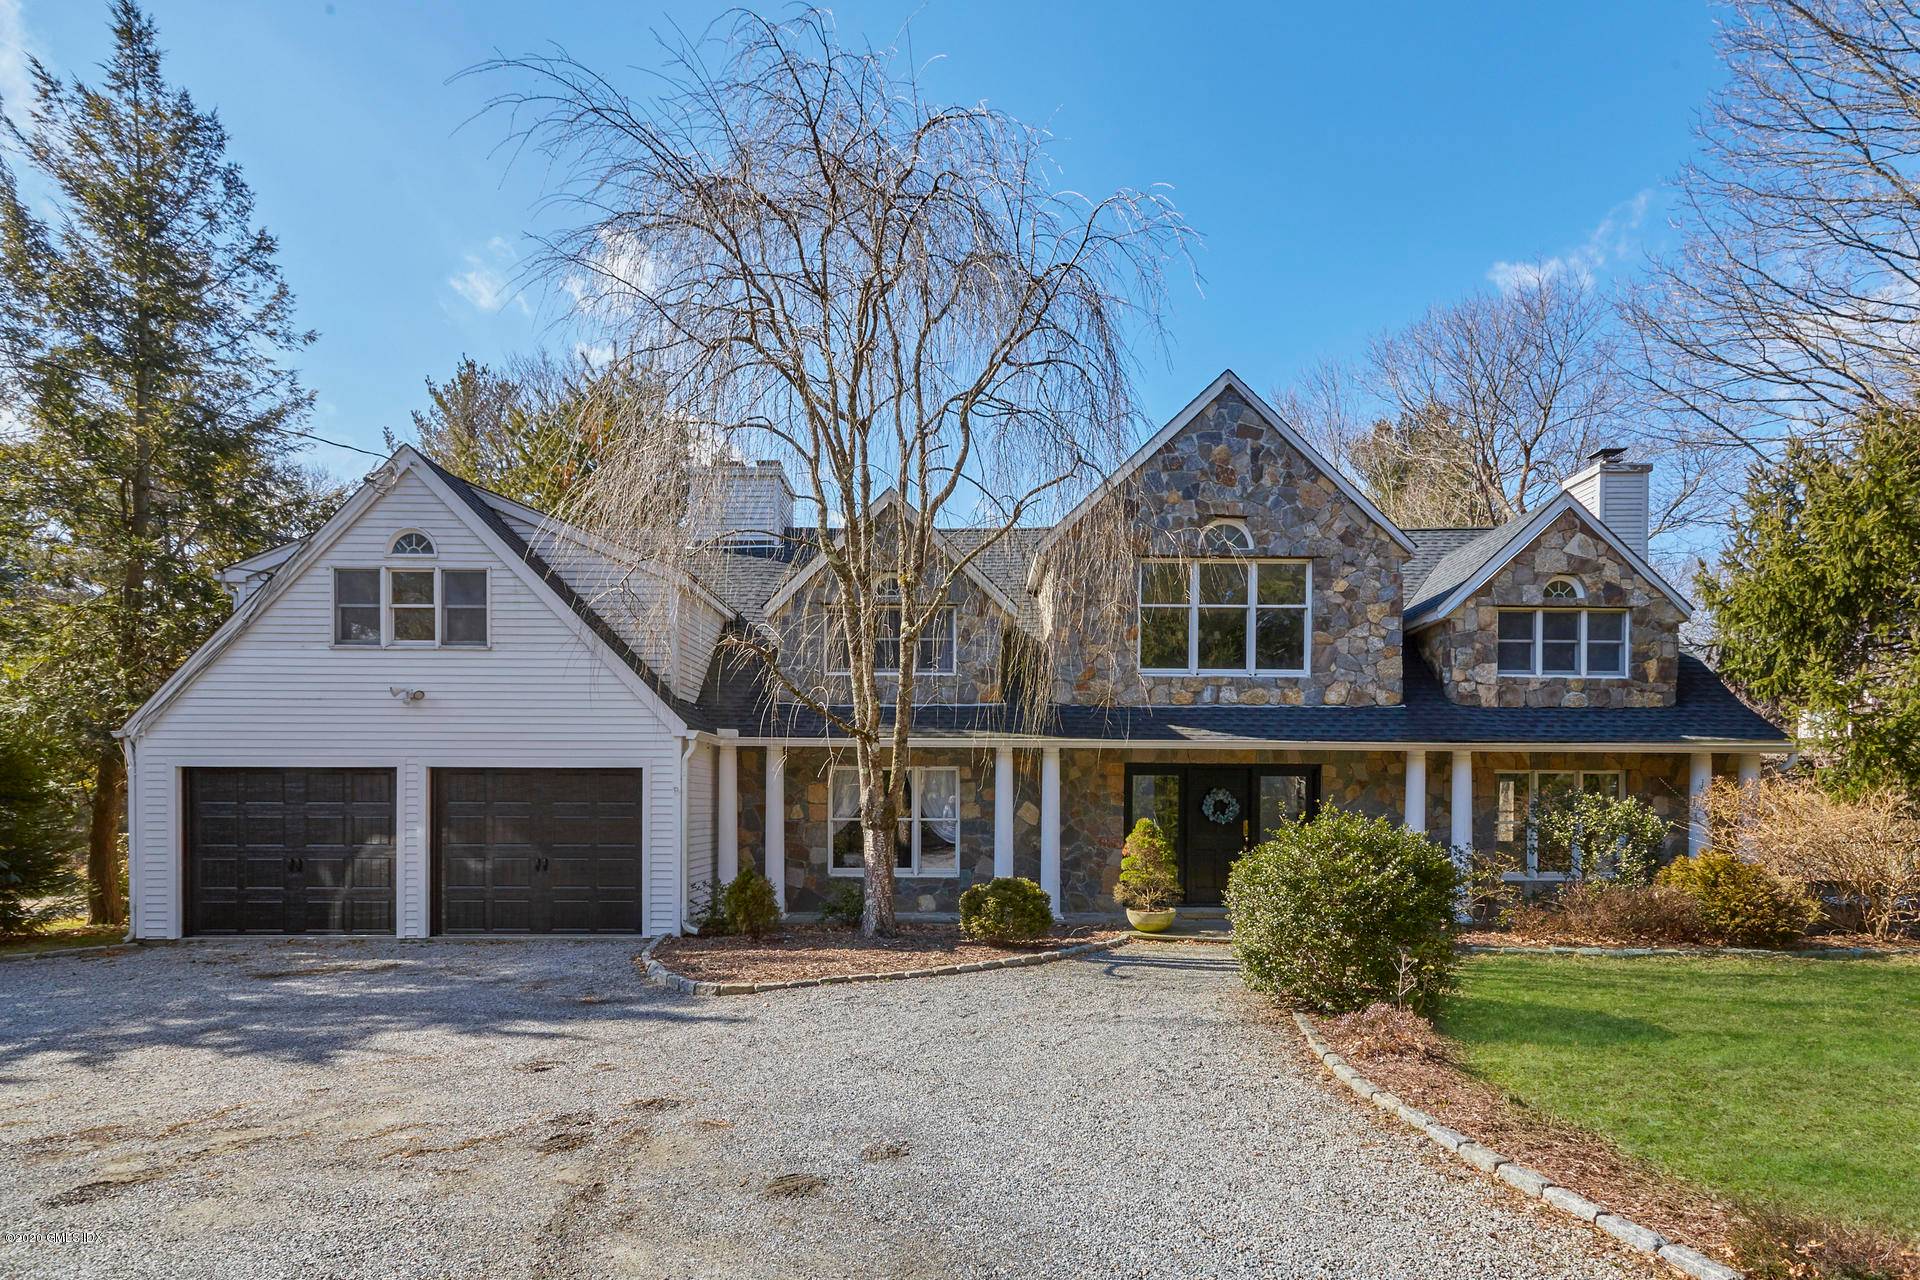 Spacious stone front colonial in coveted Westover perfectly sited on one acre that borders the Mianus River.